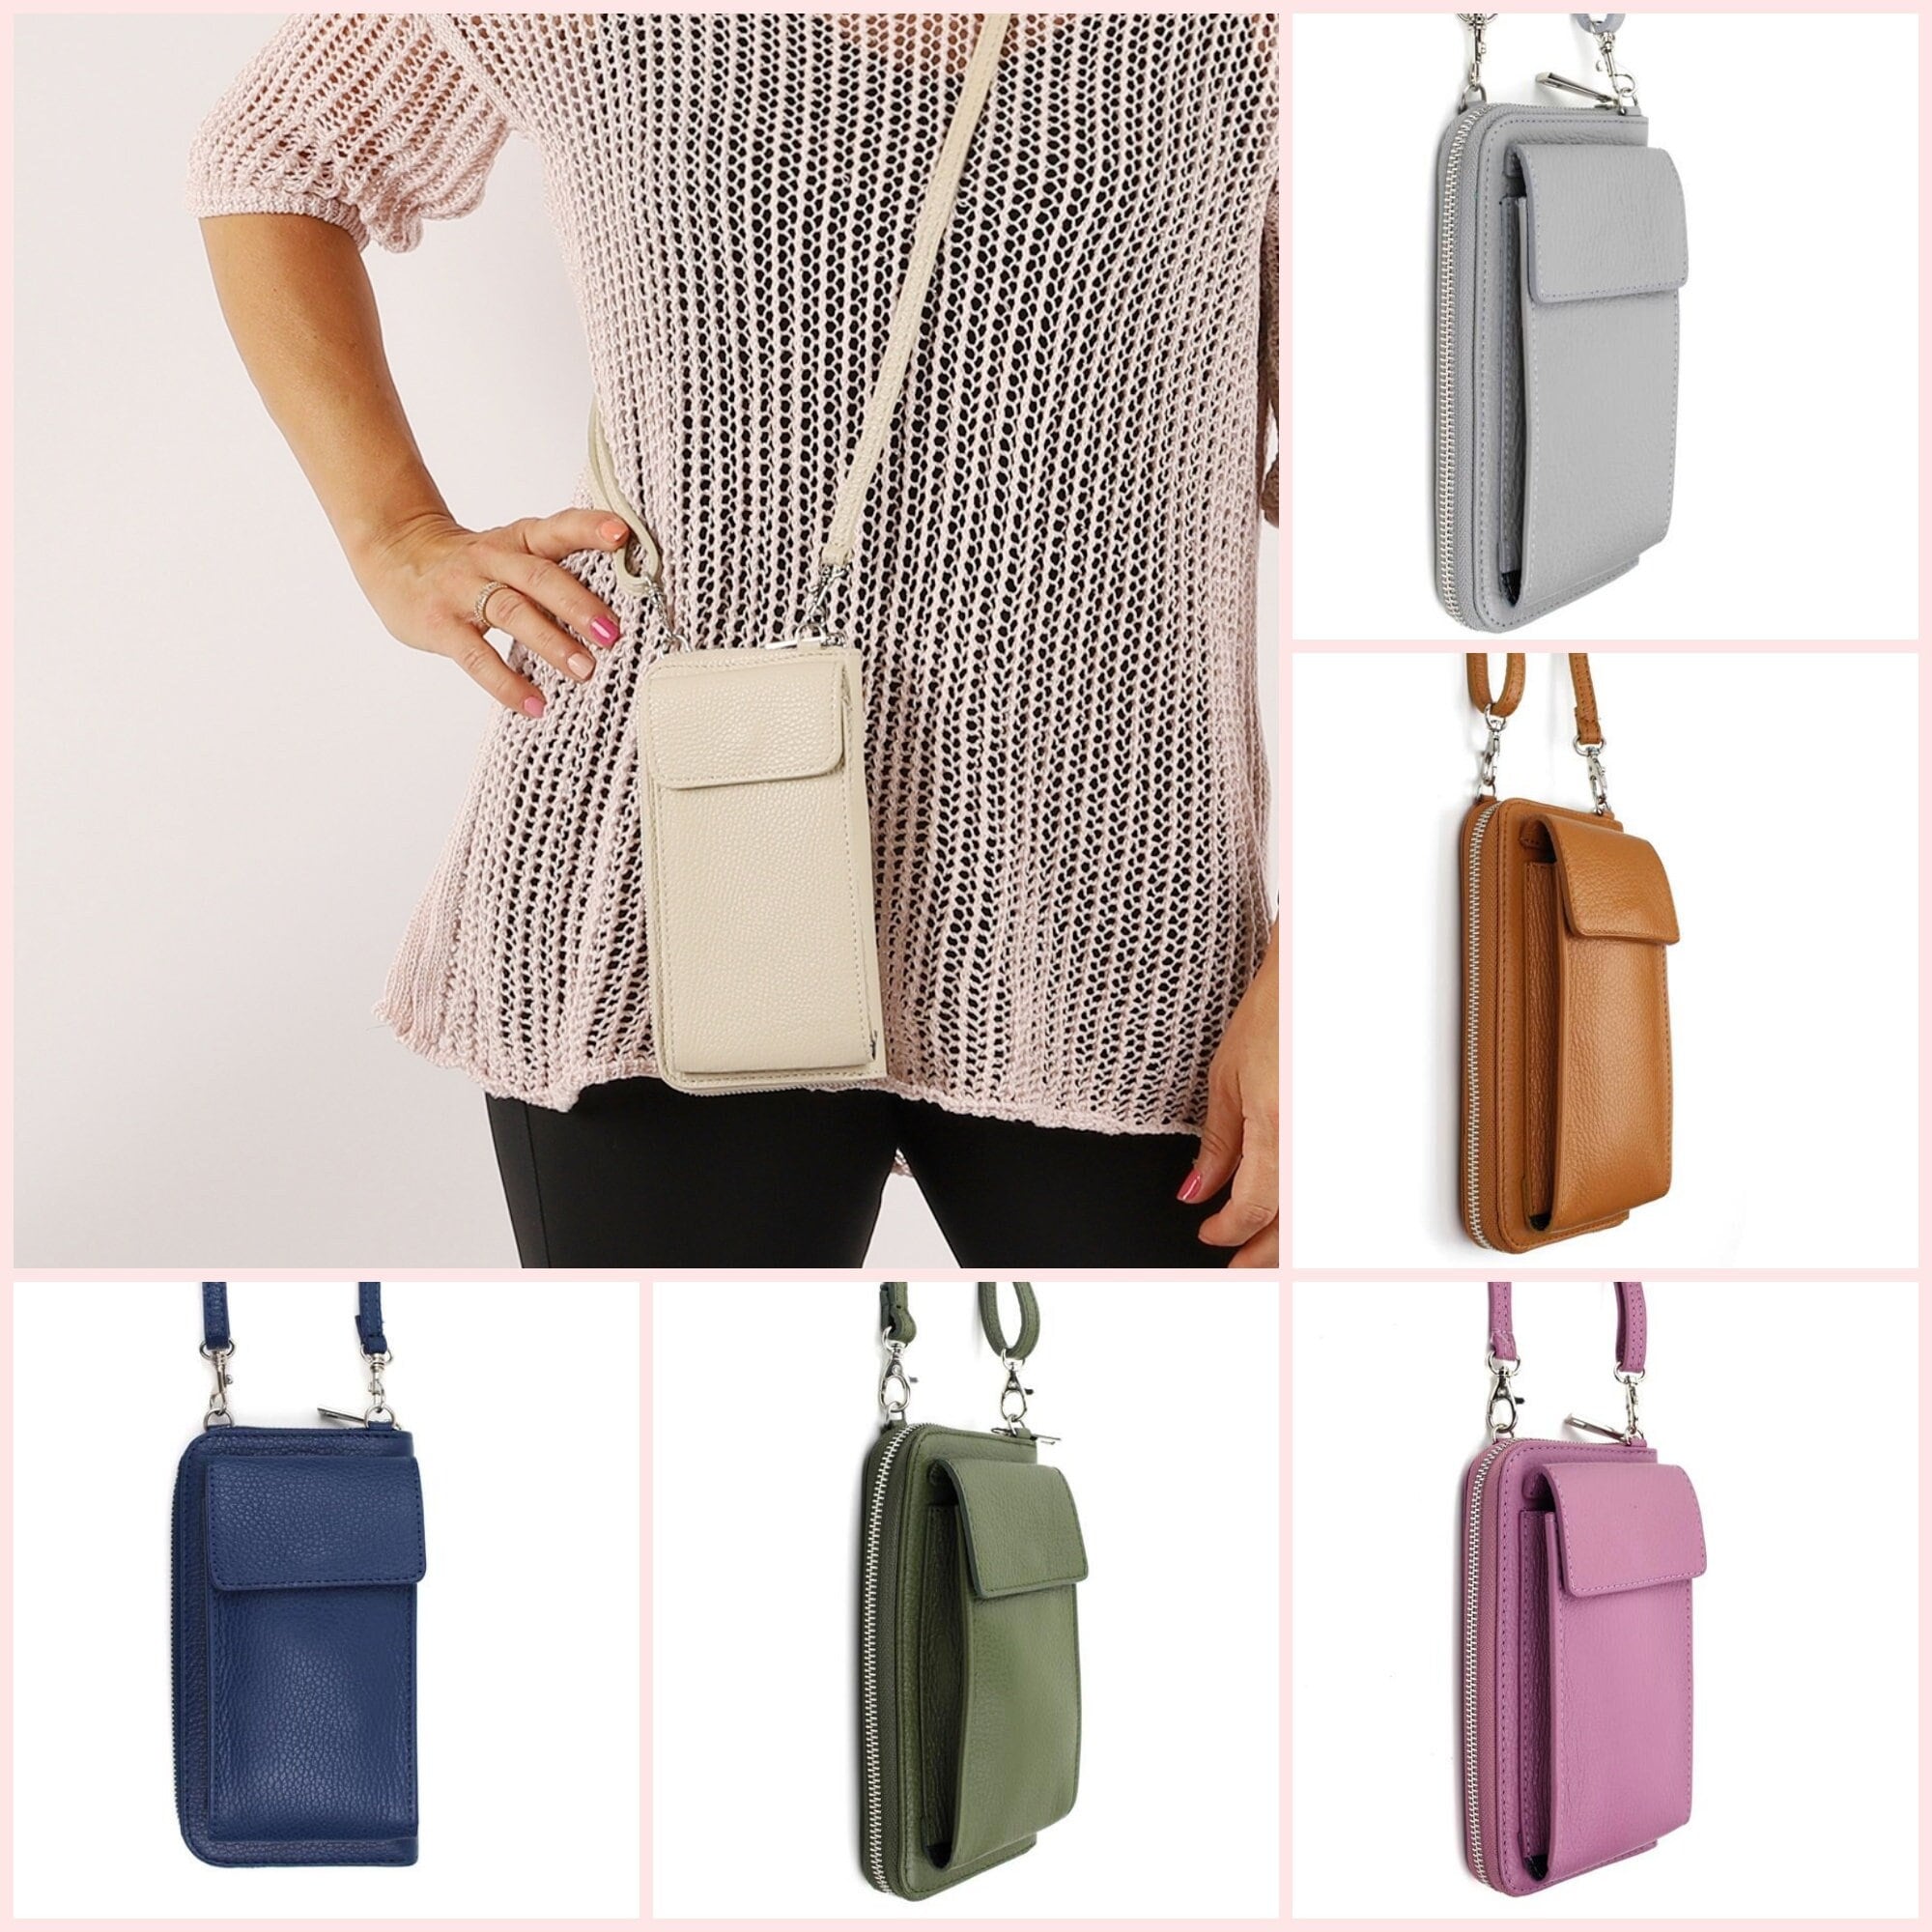 REETEE Crossbody Phone Bag For Women RFID Blocking Small Cellphone Cross Body Shoulder Bag Phone Purse with 24 Card Slots Ladies Wallet with